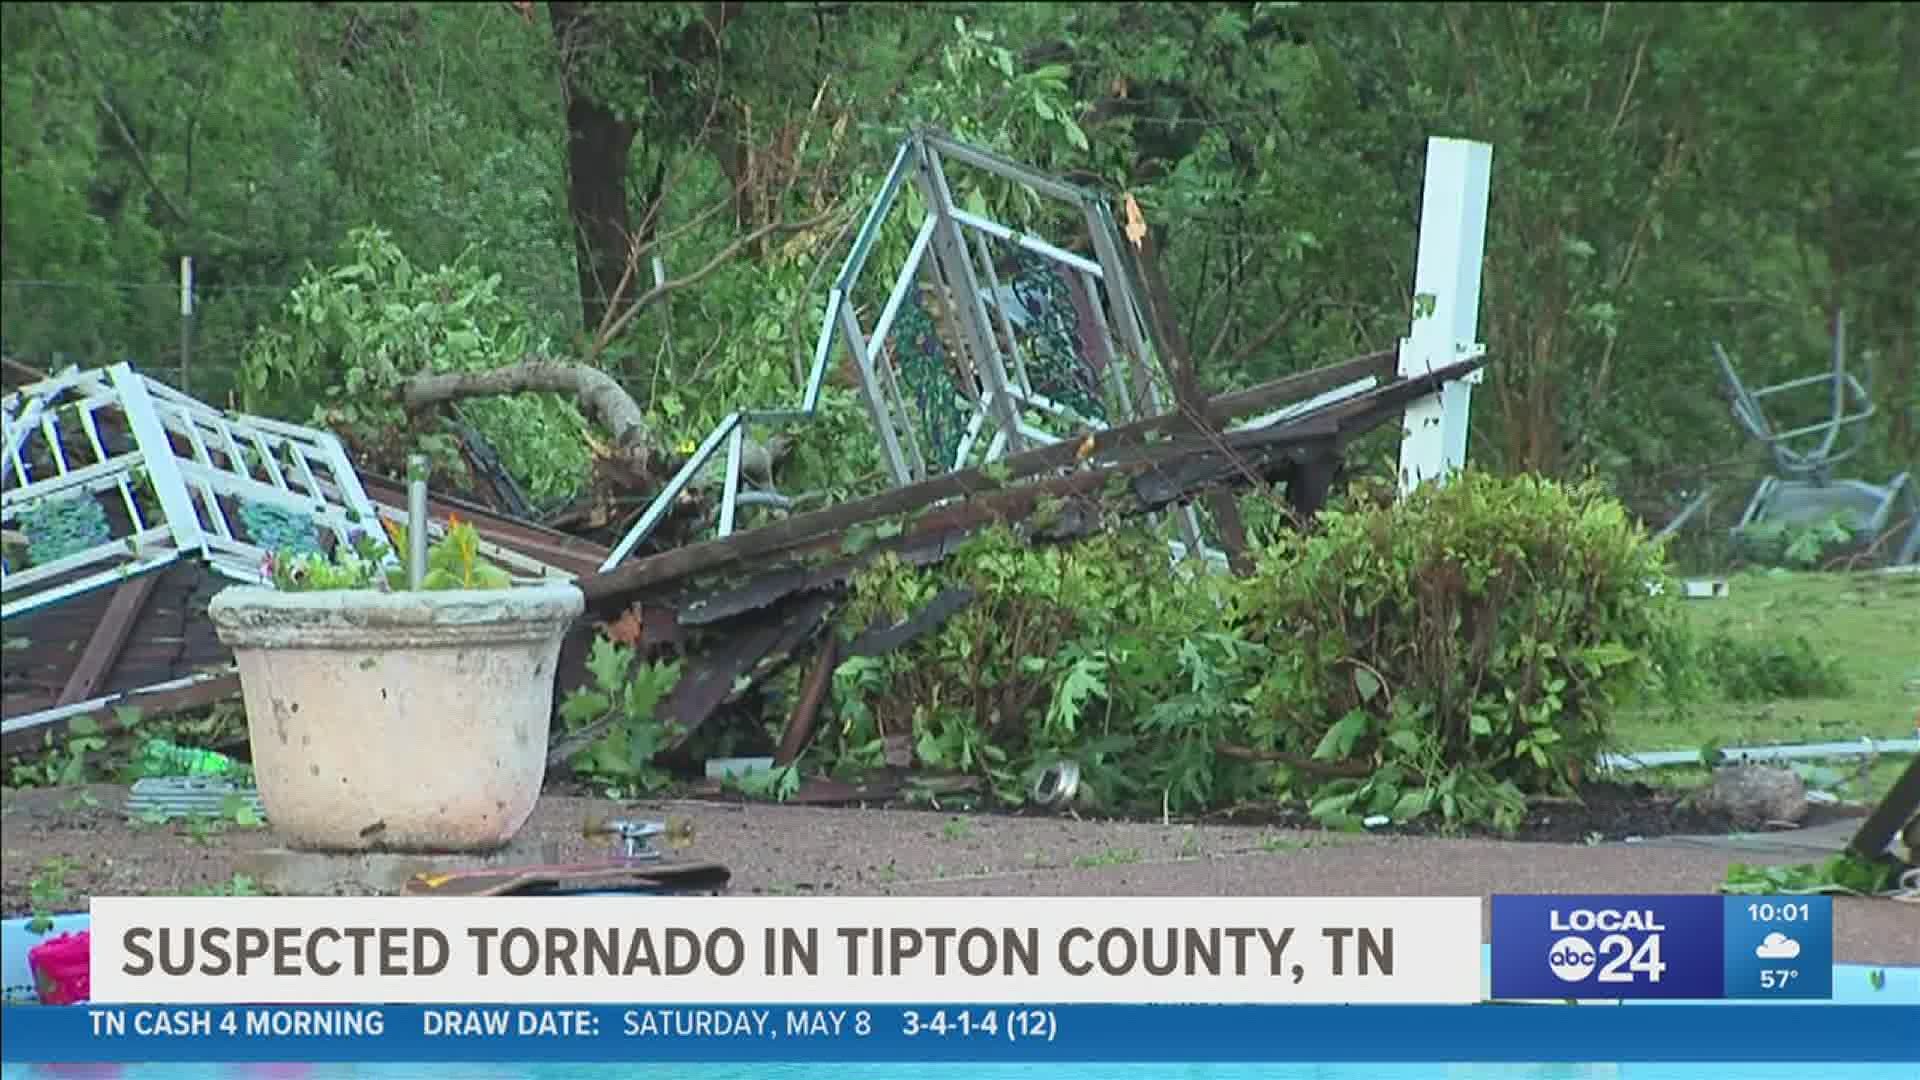 Tipton County Emergency Services said no injuries have been reported.